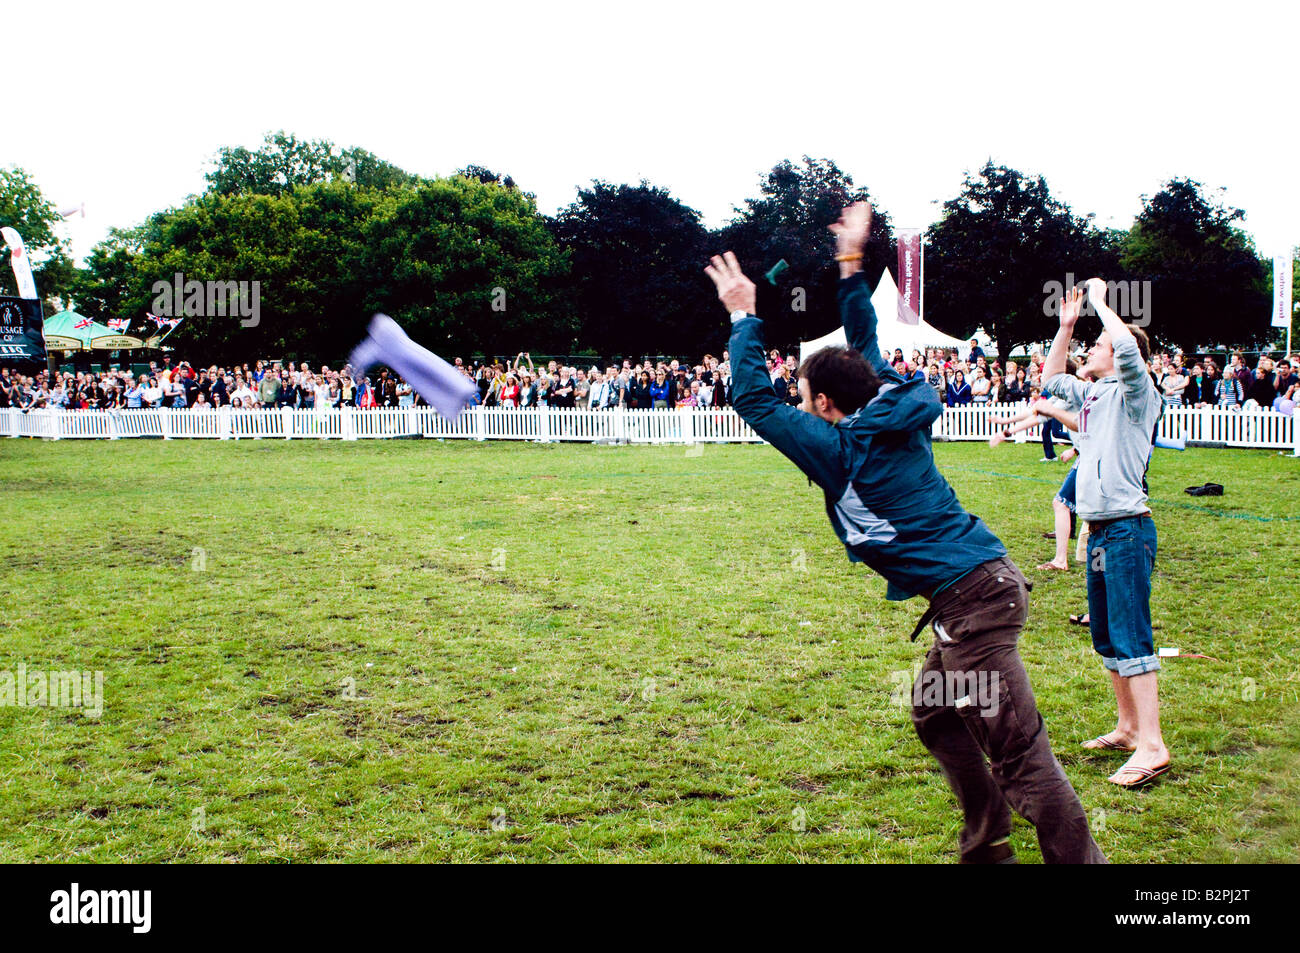 children compete in welly wanging competition at a london summer festival Stock Photo